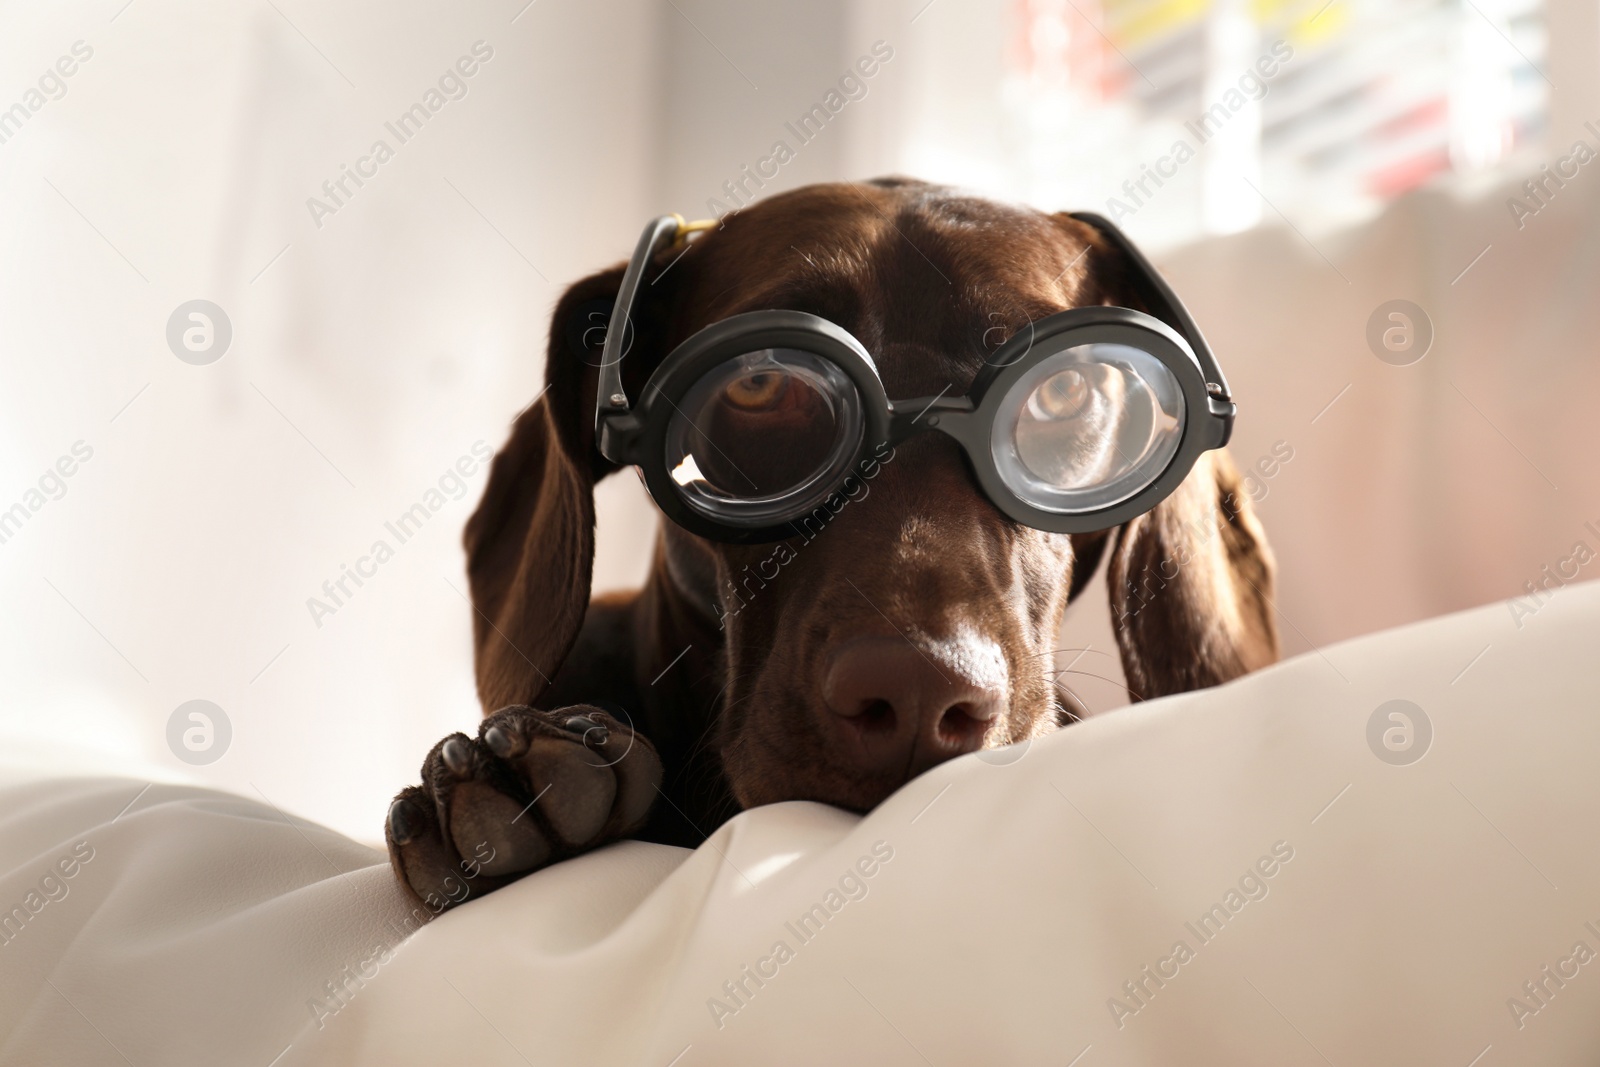 Photo of Adorable German Shorthaired Pointer dog in funny glasses on cushion indoors. Halloween costume for pet